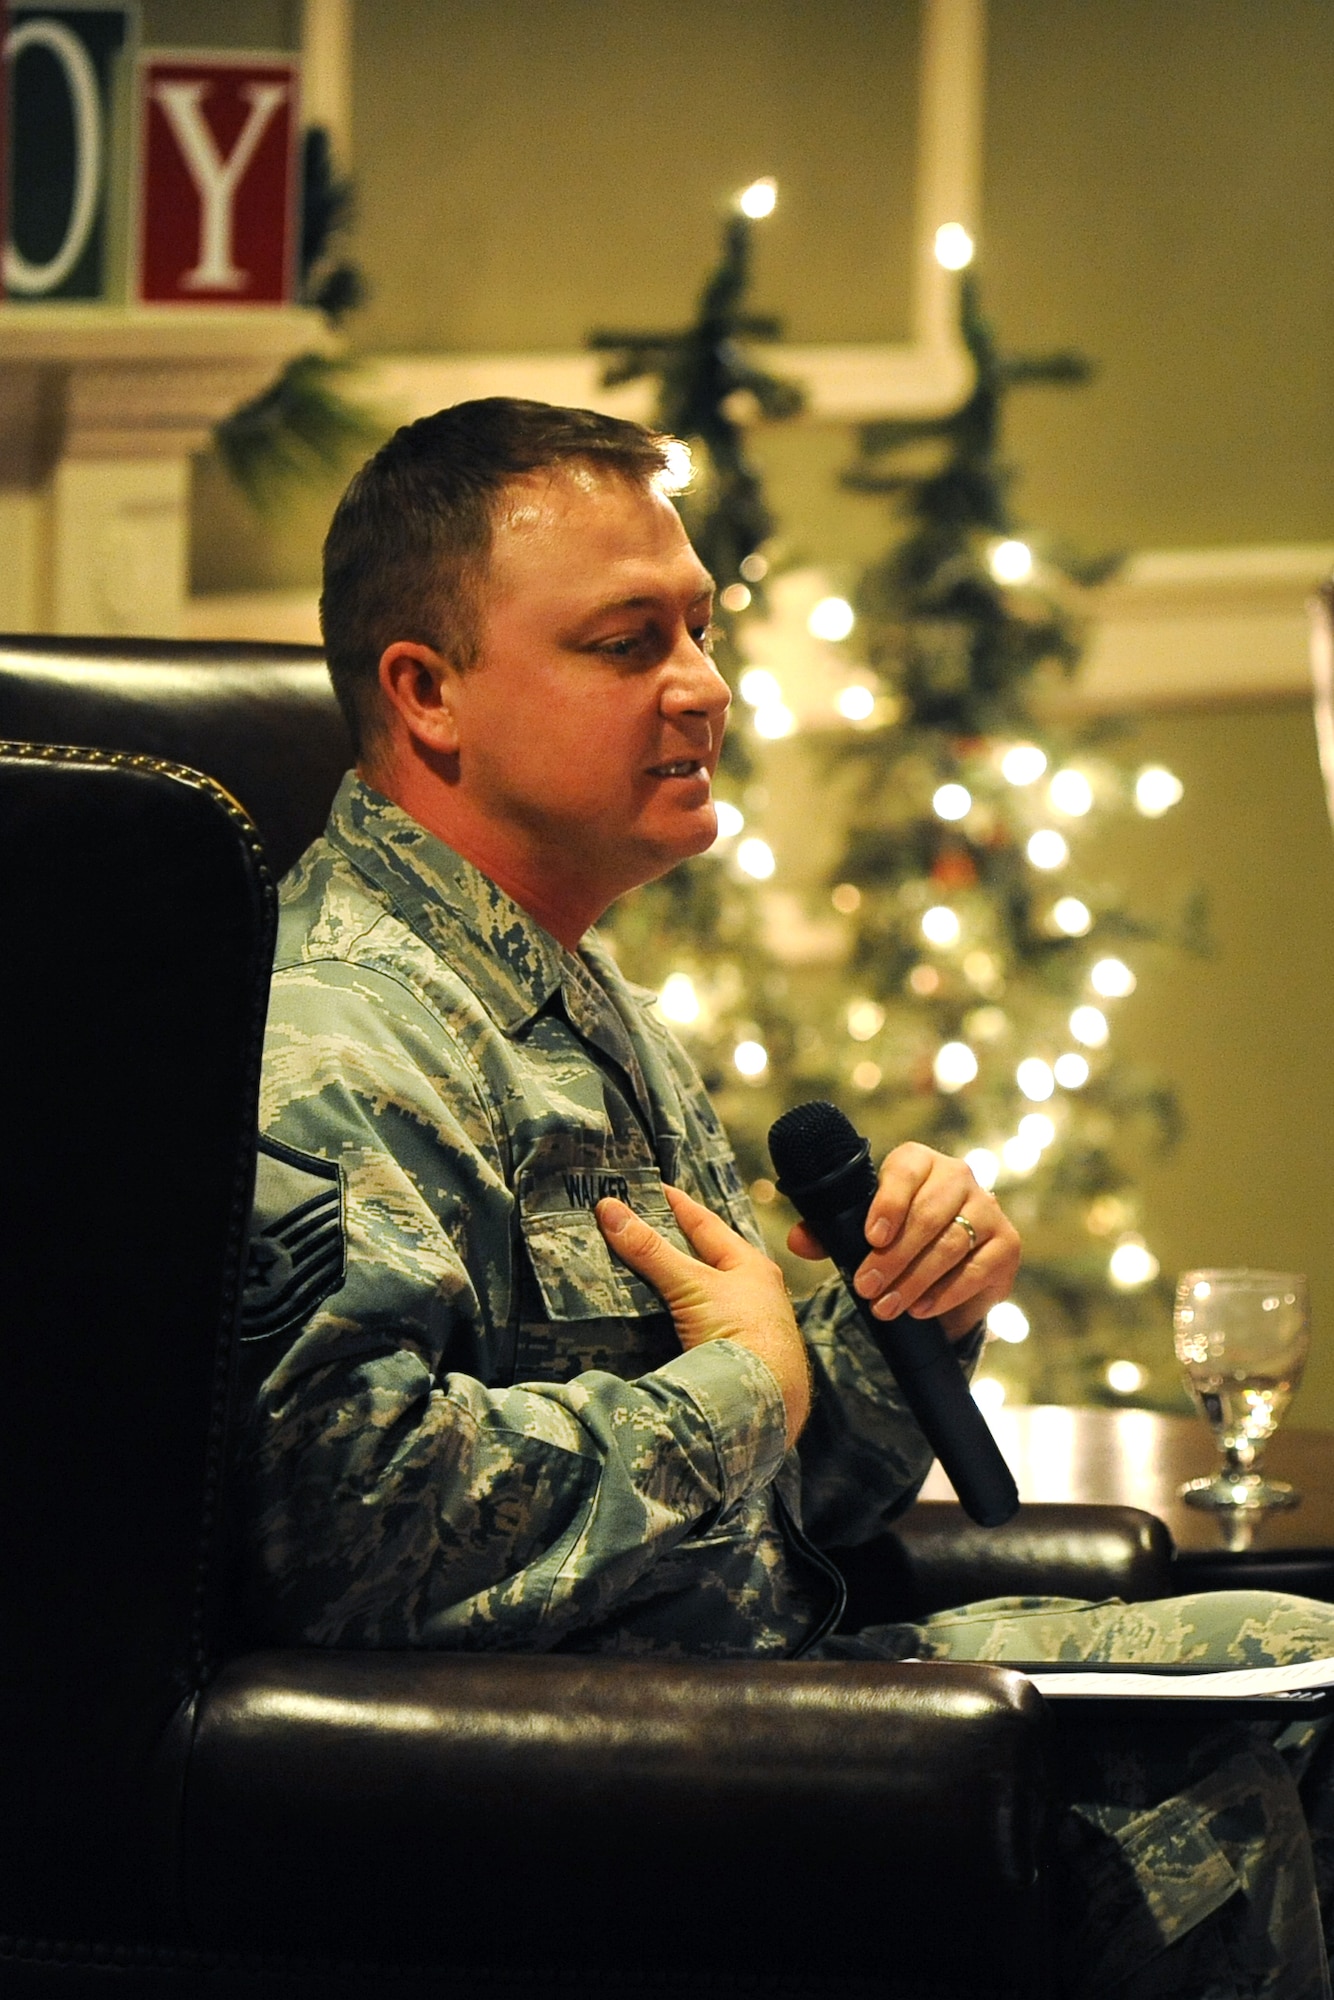 U.S. Air Force Master Sgt. John Walker, 55th Wing Chaplain’s office, opens up about his Post Traumatic Stress Disorder following his tours to Iraq during the inaugural Story Tellers event called ‘The Long and Short of it’ held on Dec. 16 at the Patriot Club on Offutt Air Force Base, Neb.  A total of four Airmen spoke about a wide range of topics in this story telling mentorship event.  (U.S. Air Force photo by Josh Plueger/Released)